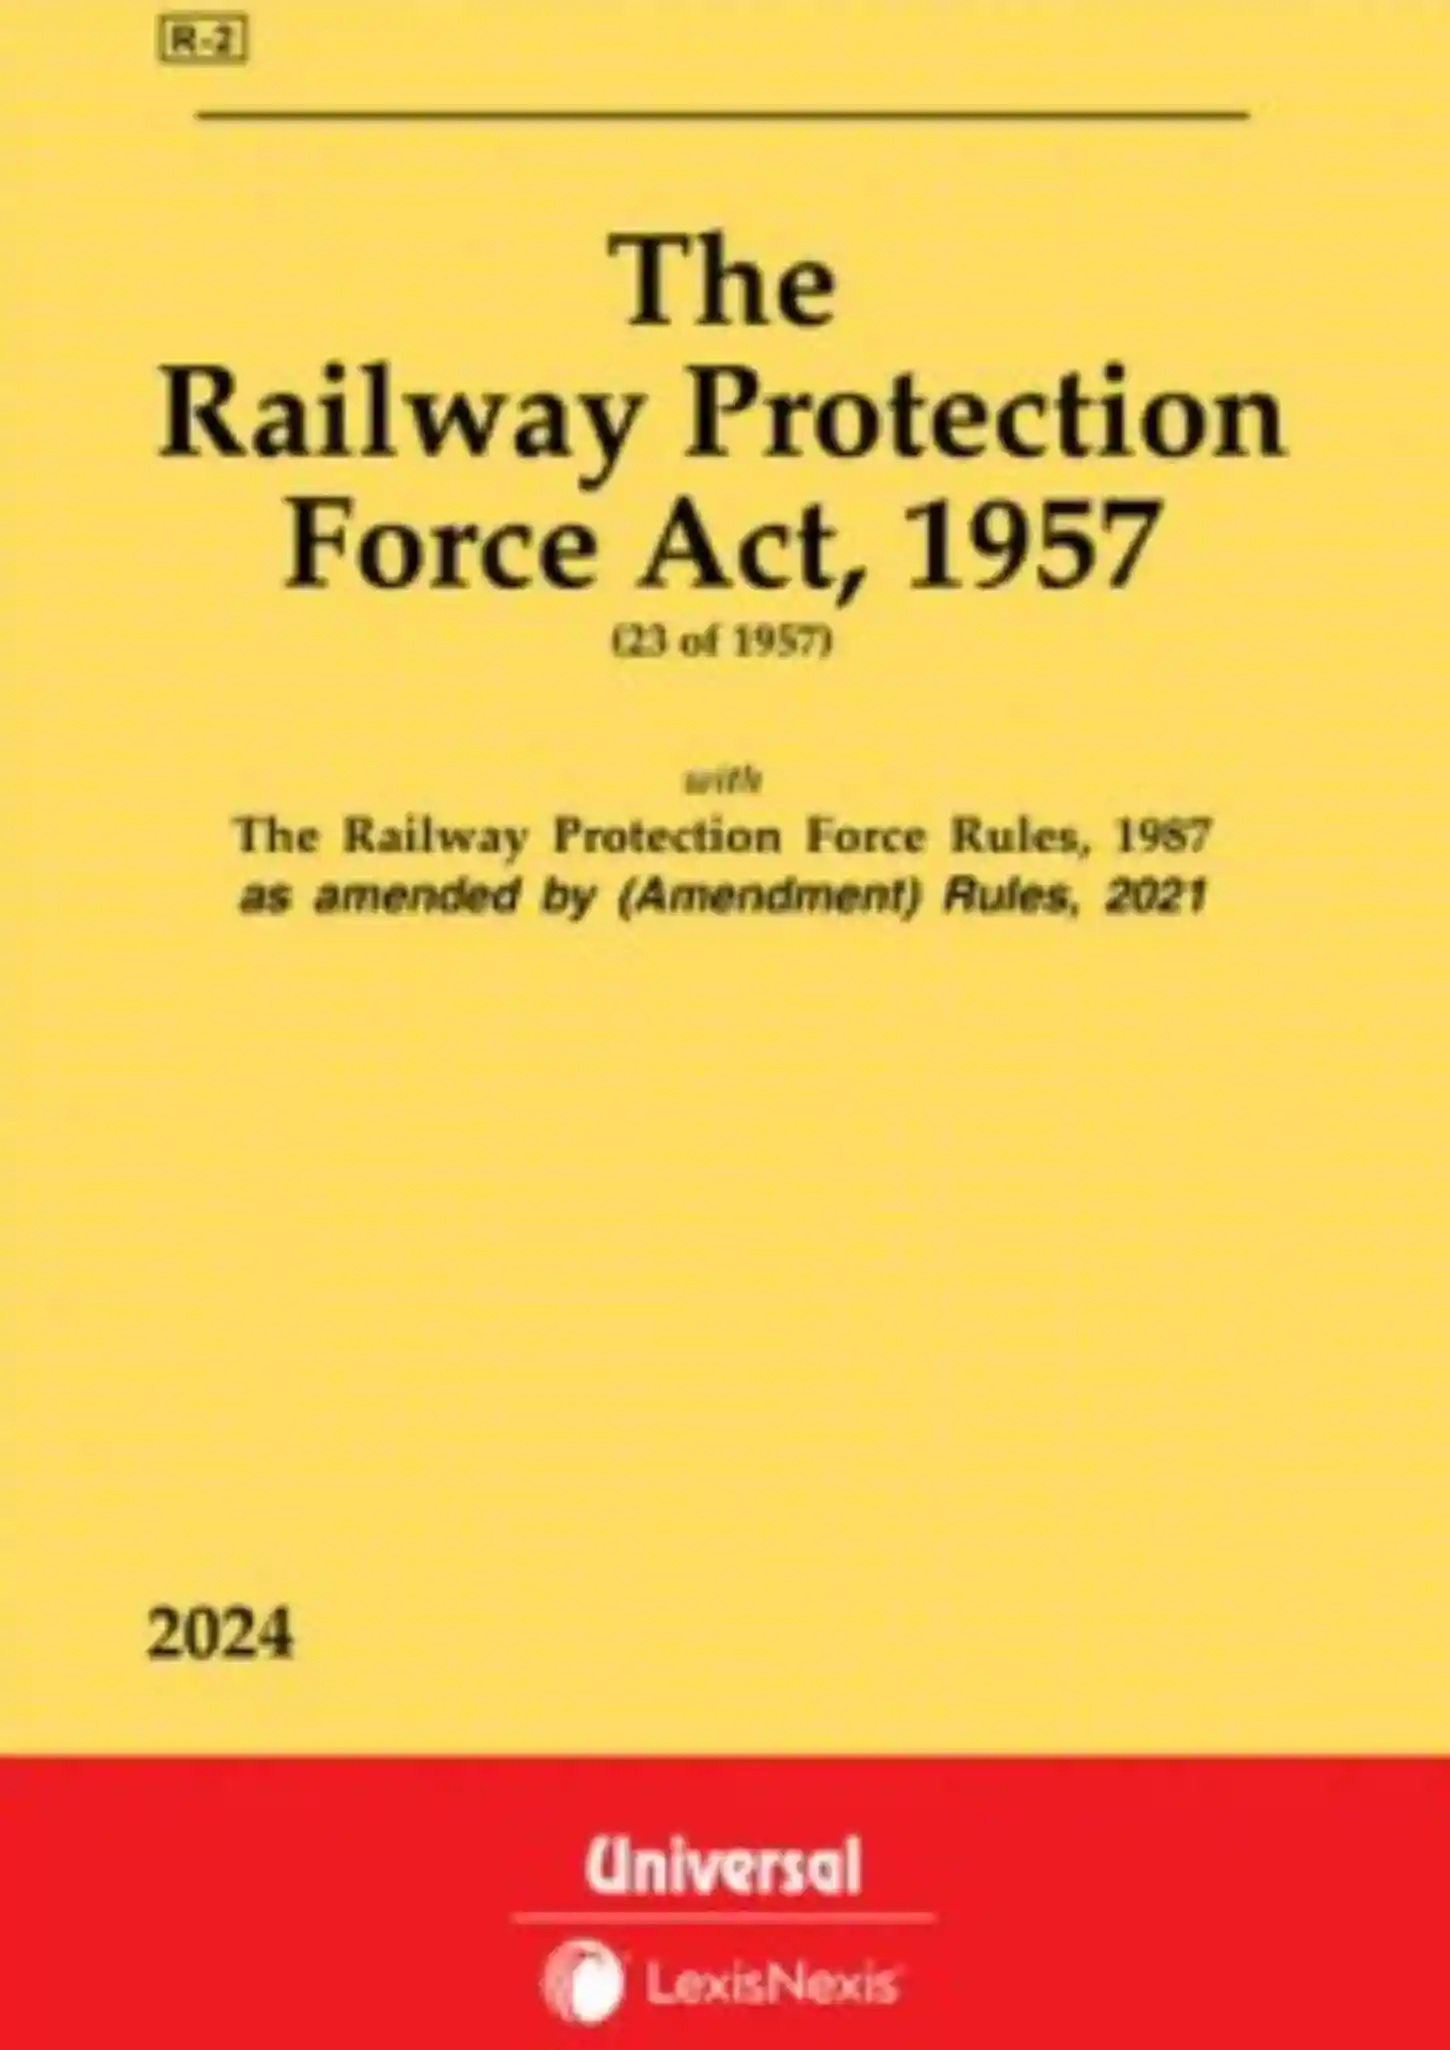 Railway Protection Force Act, 1957 along with Rules, 1987